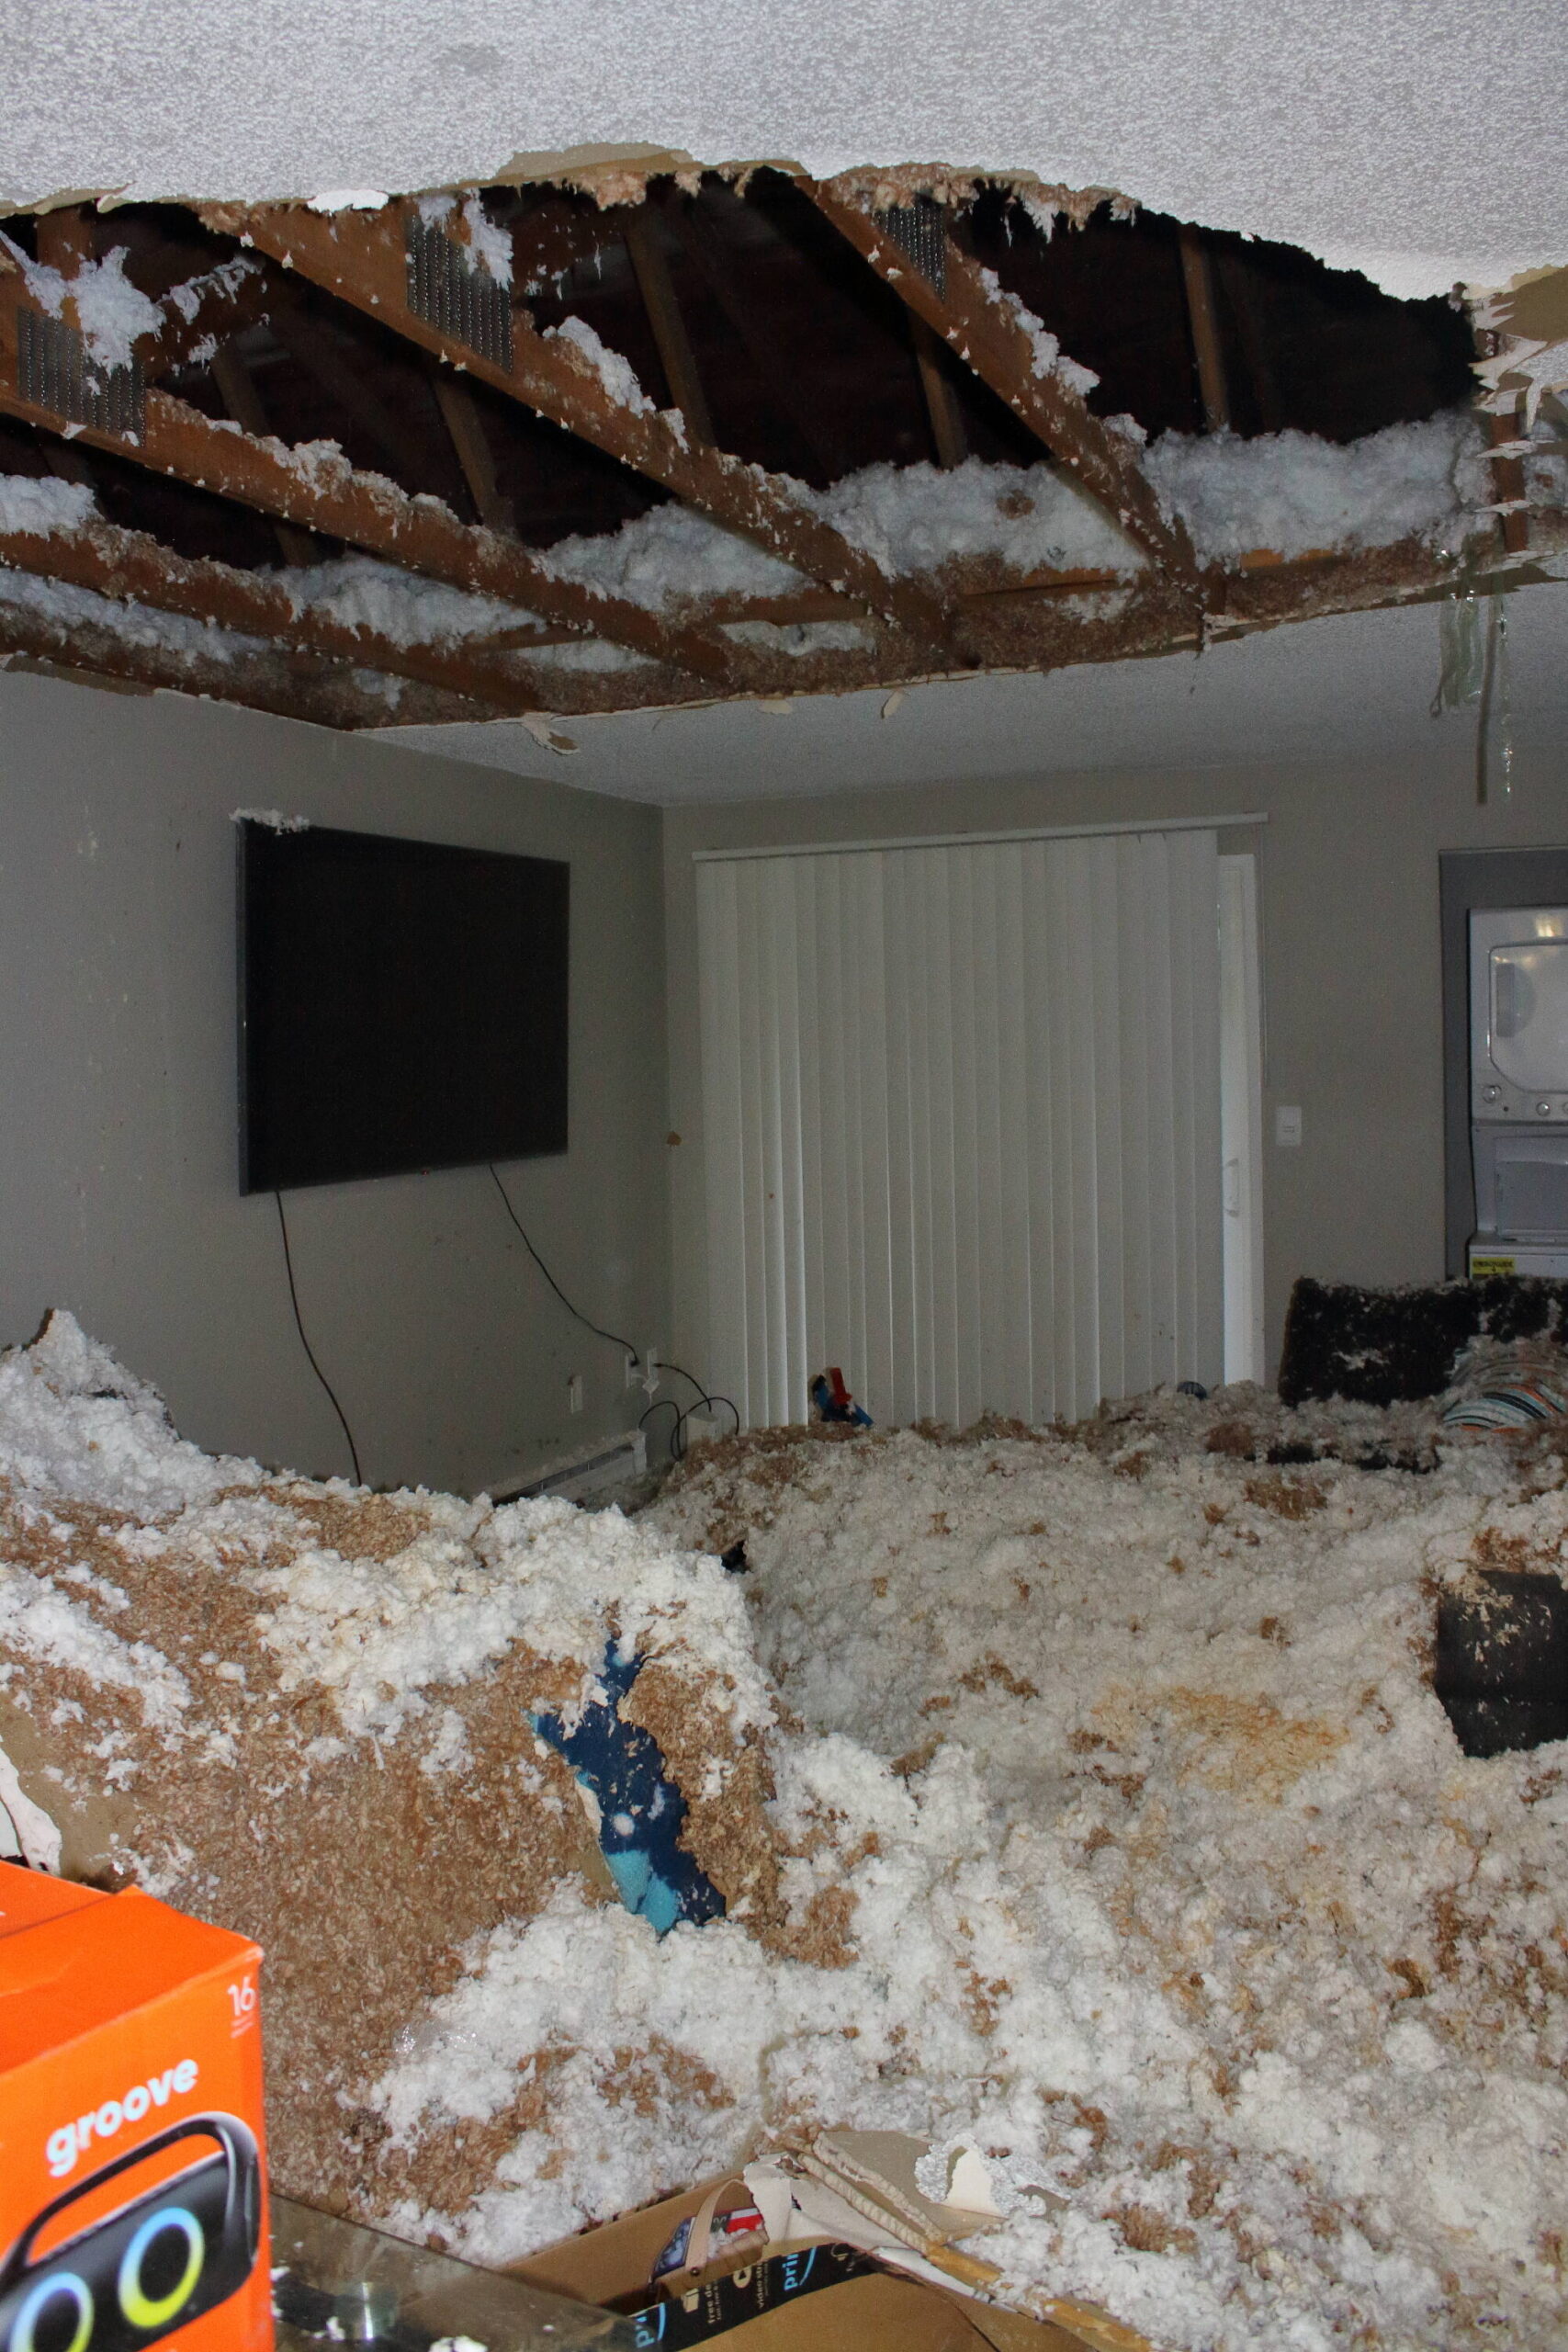 A resident at Miro Apartments arrived home to find her apartment covered in the insulation and ceiling detritus seen here. She has worked overtime to afford the furniture buried under the wreckage after fleeing a domestic violence situation. Photo by Keelin Everly-Lang / The Mirror.